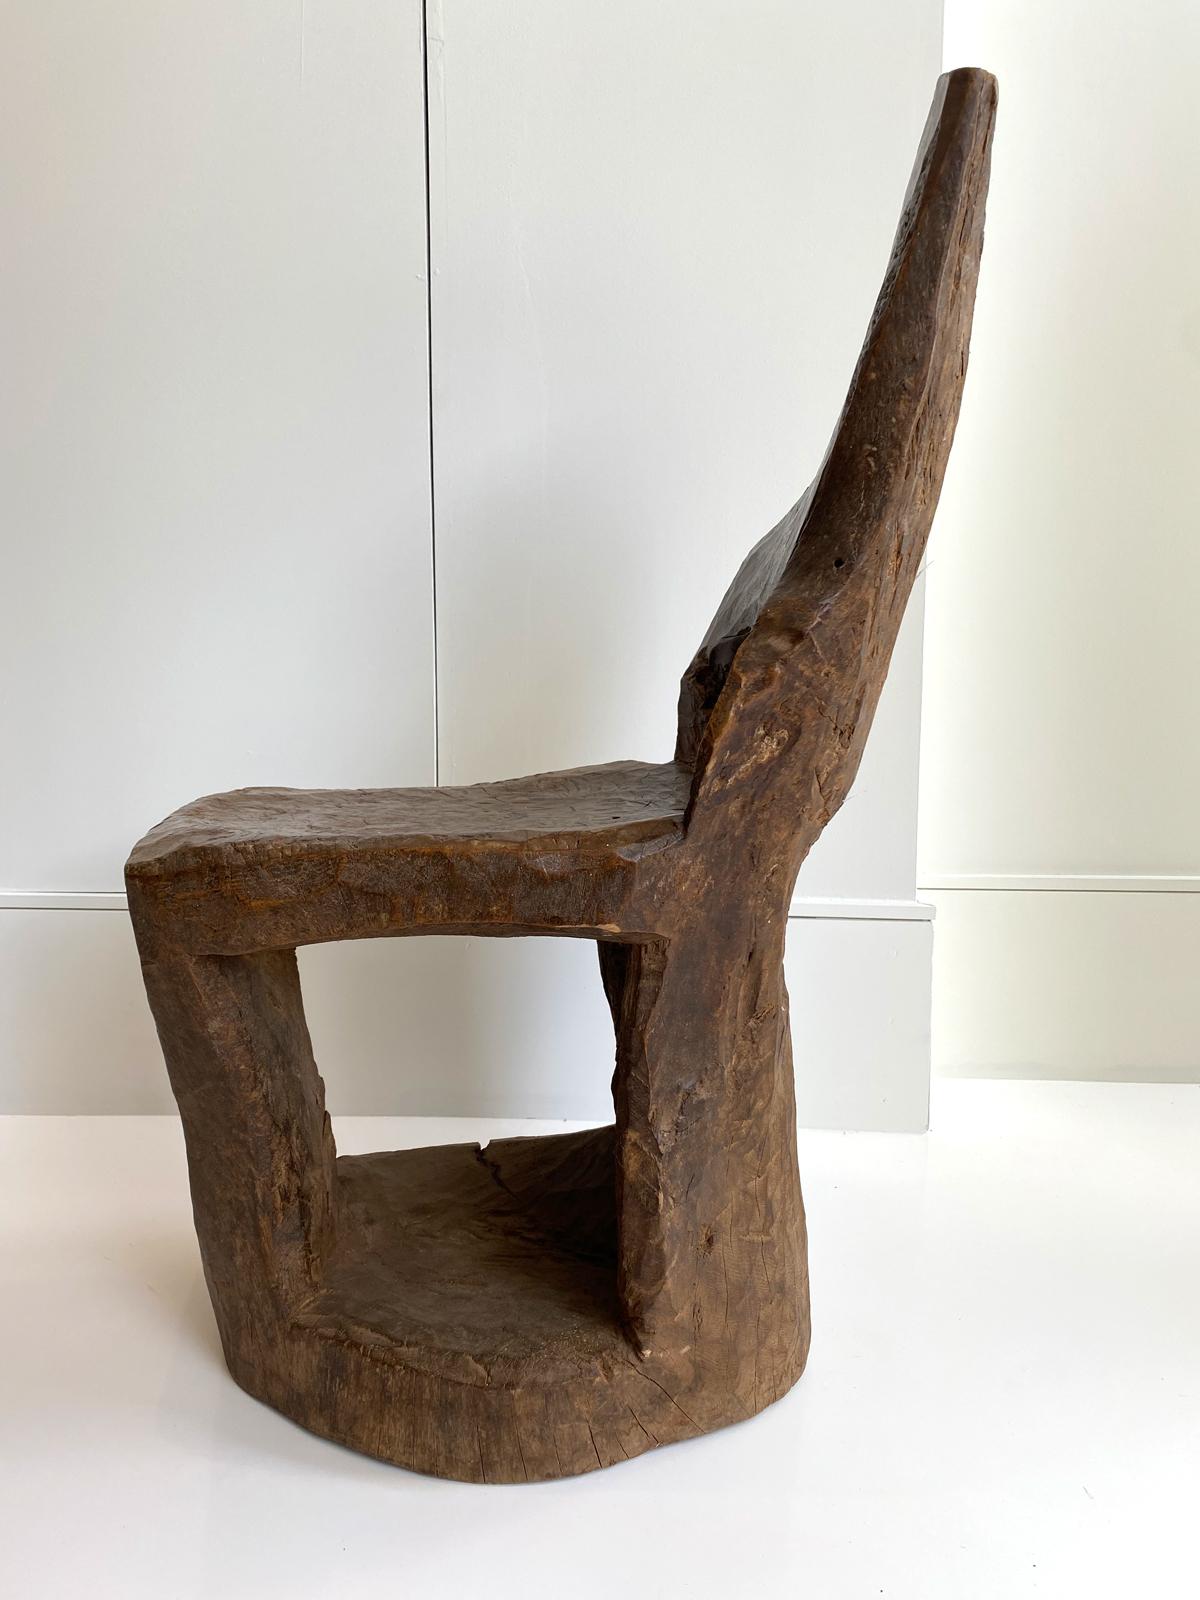 Primitive wooden chair - Organic free form wood stump repurposed into an artistic unique chair with beautiful wood grain finish and hand carving.